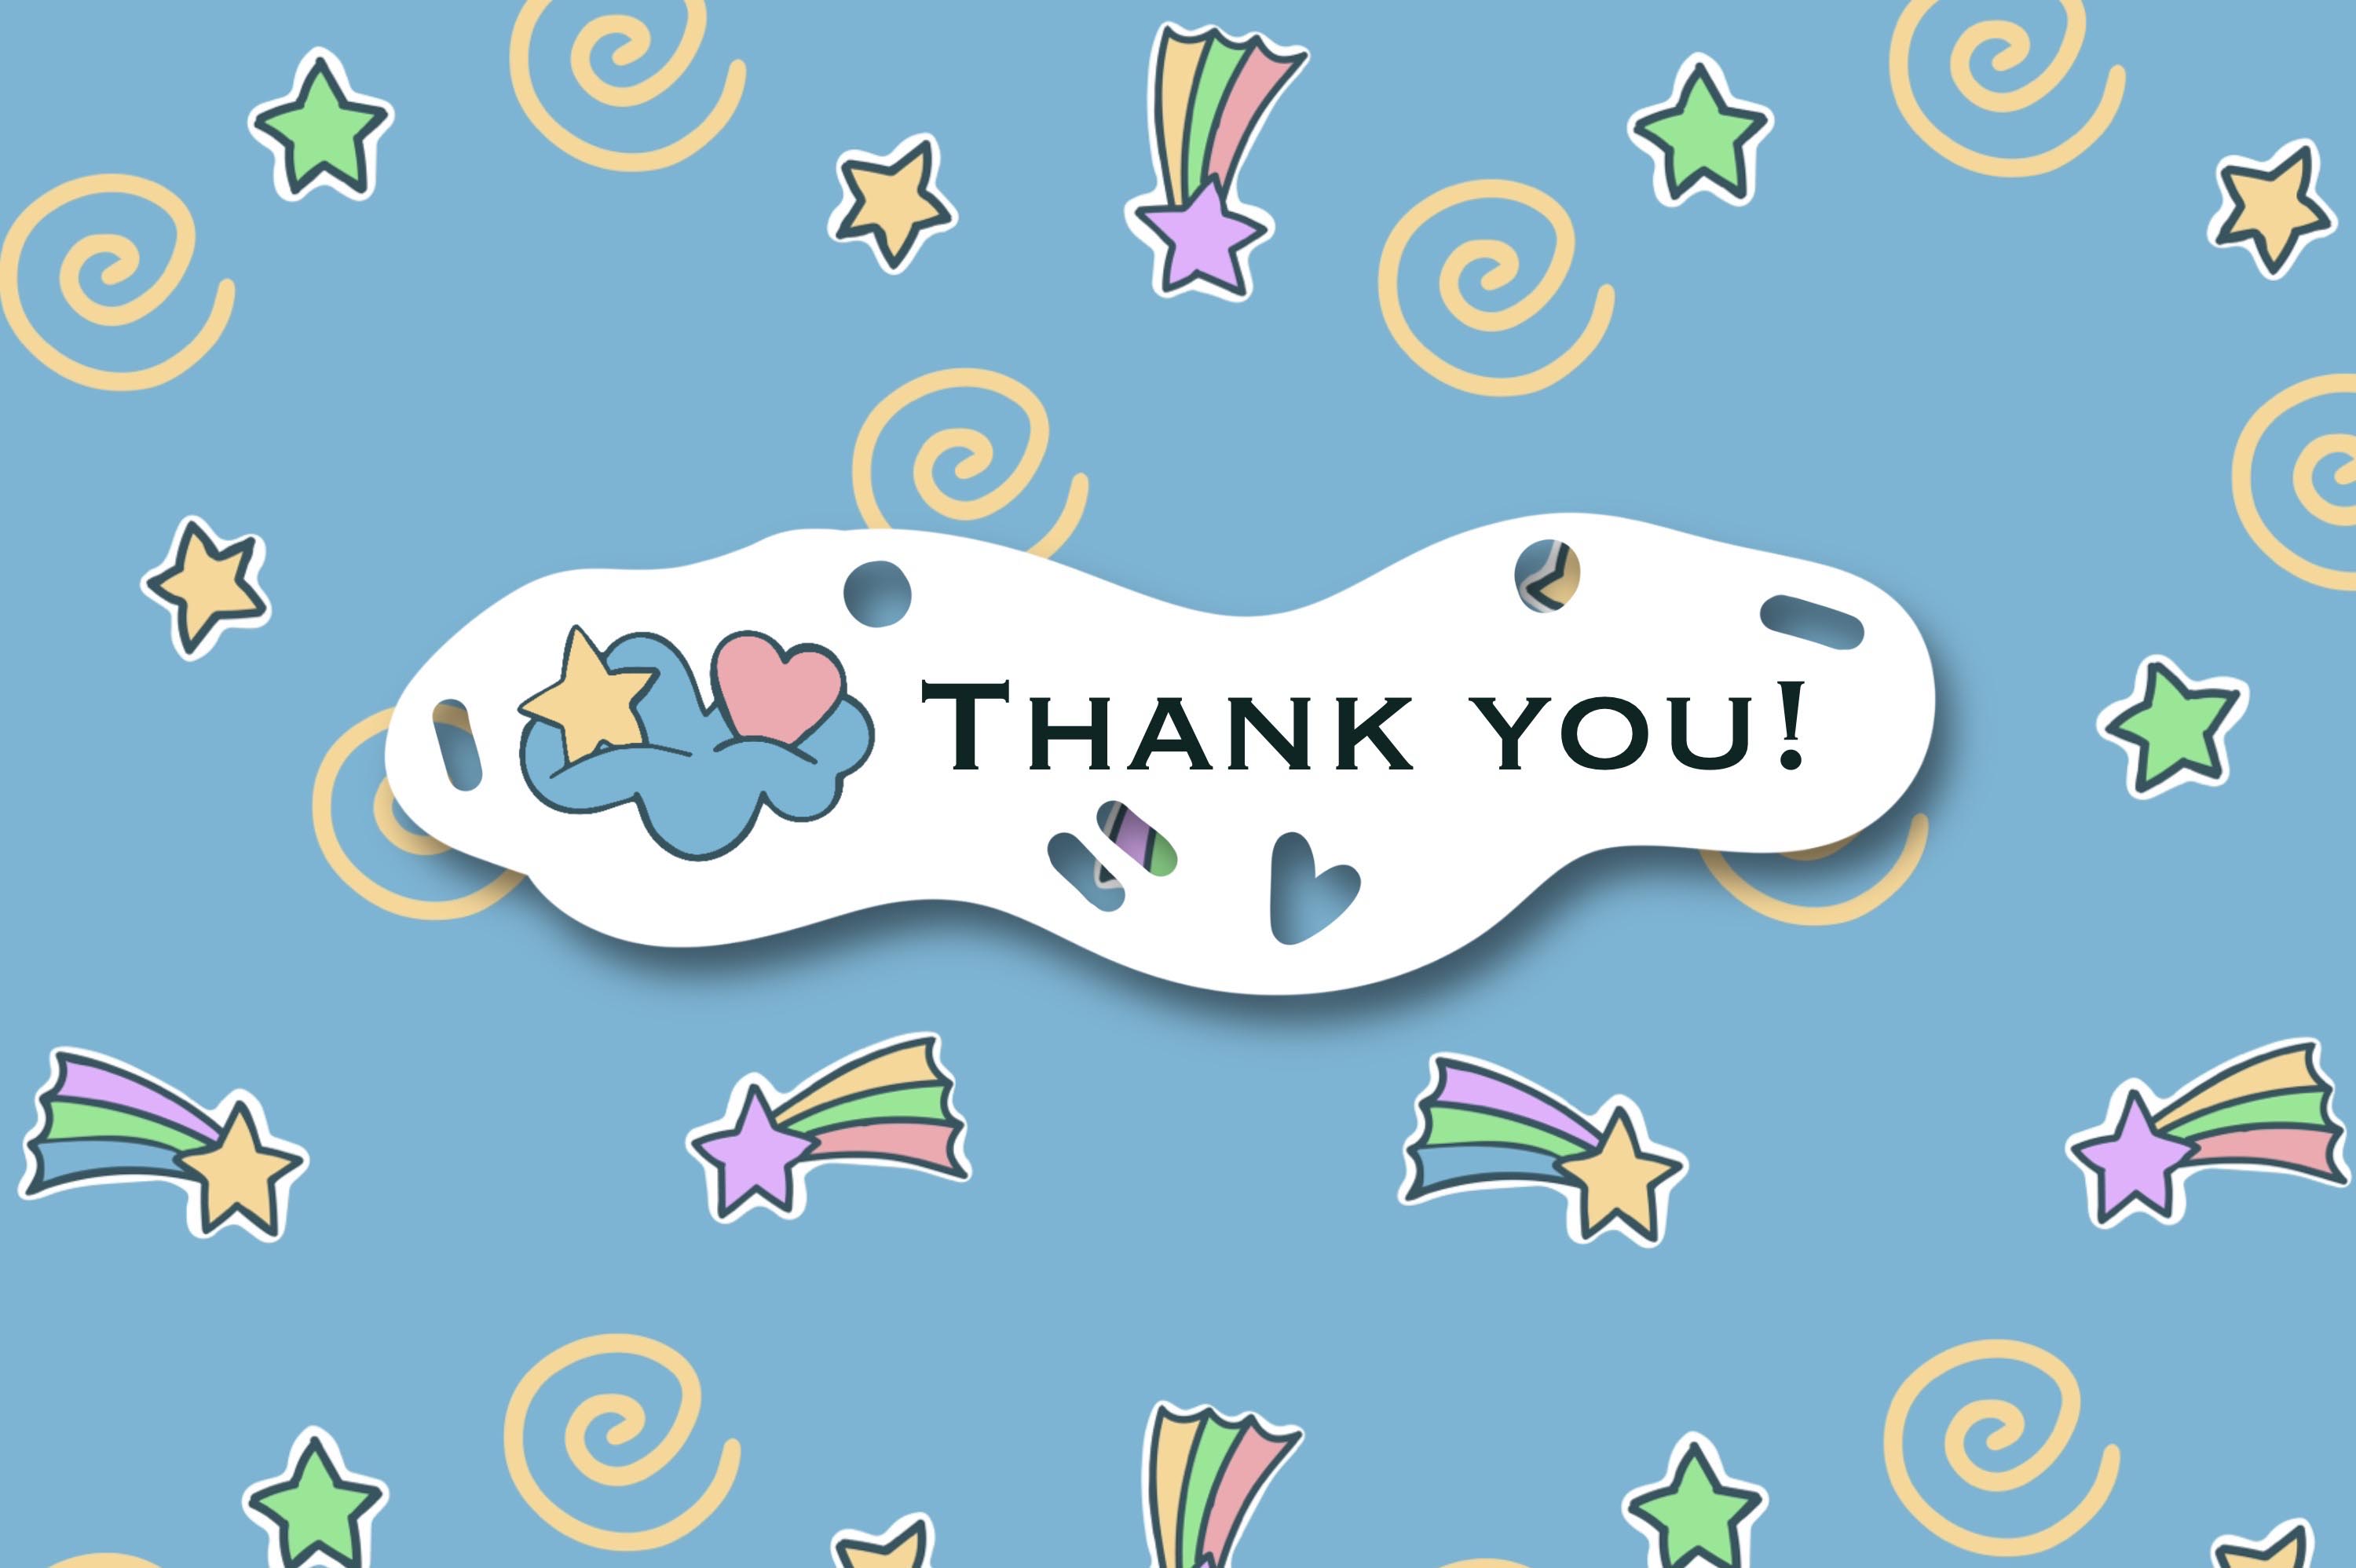 Thank you phrase for Baby Sweet Dreams Seamless Patterns Set.